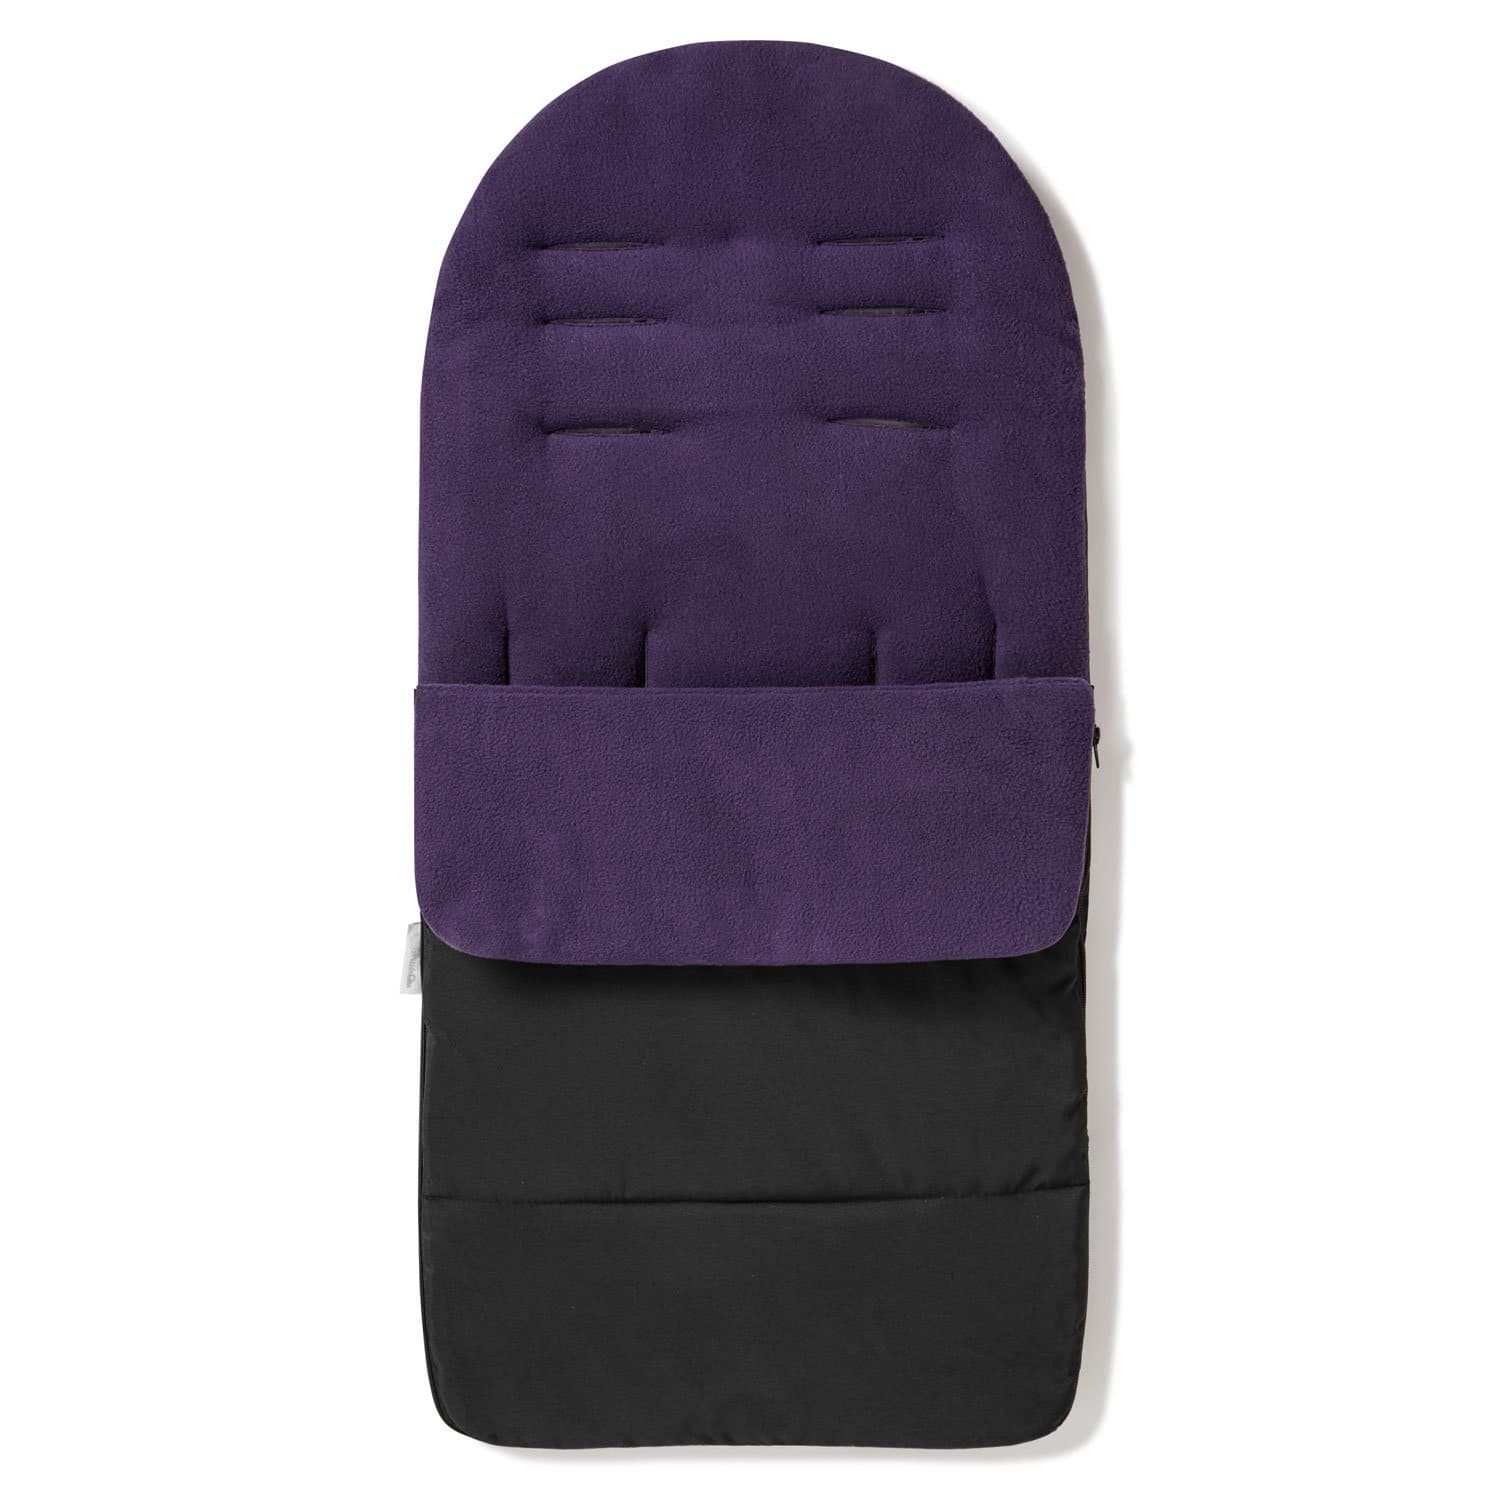 Premium Footmuff / Cosy Toes Compatible with Nania - Plum Purple / Fits All Models | For Your Little One